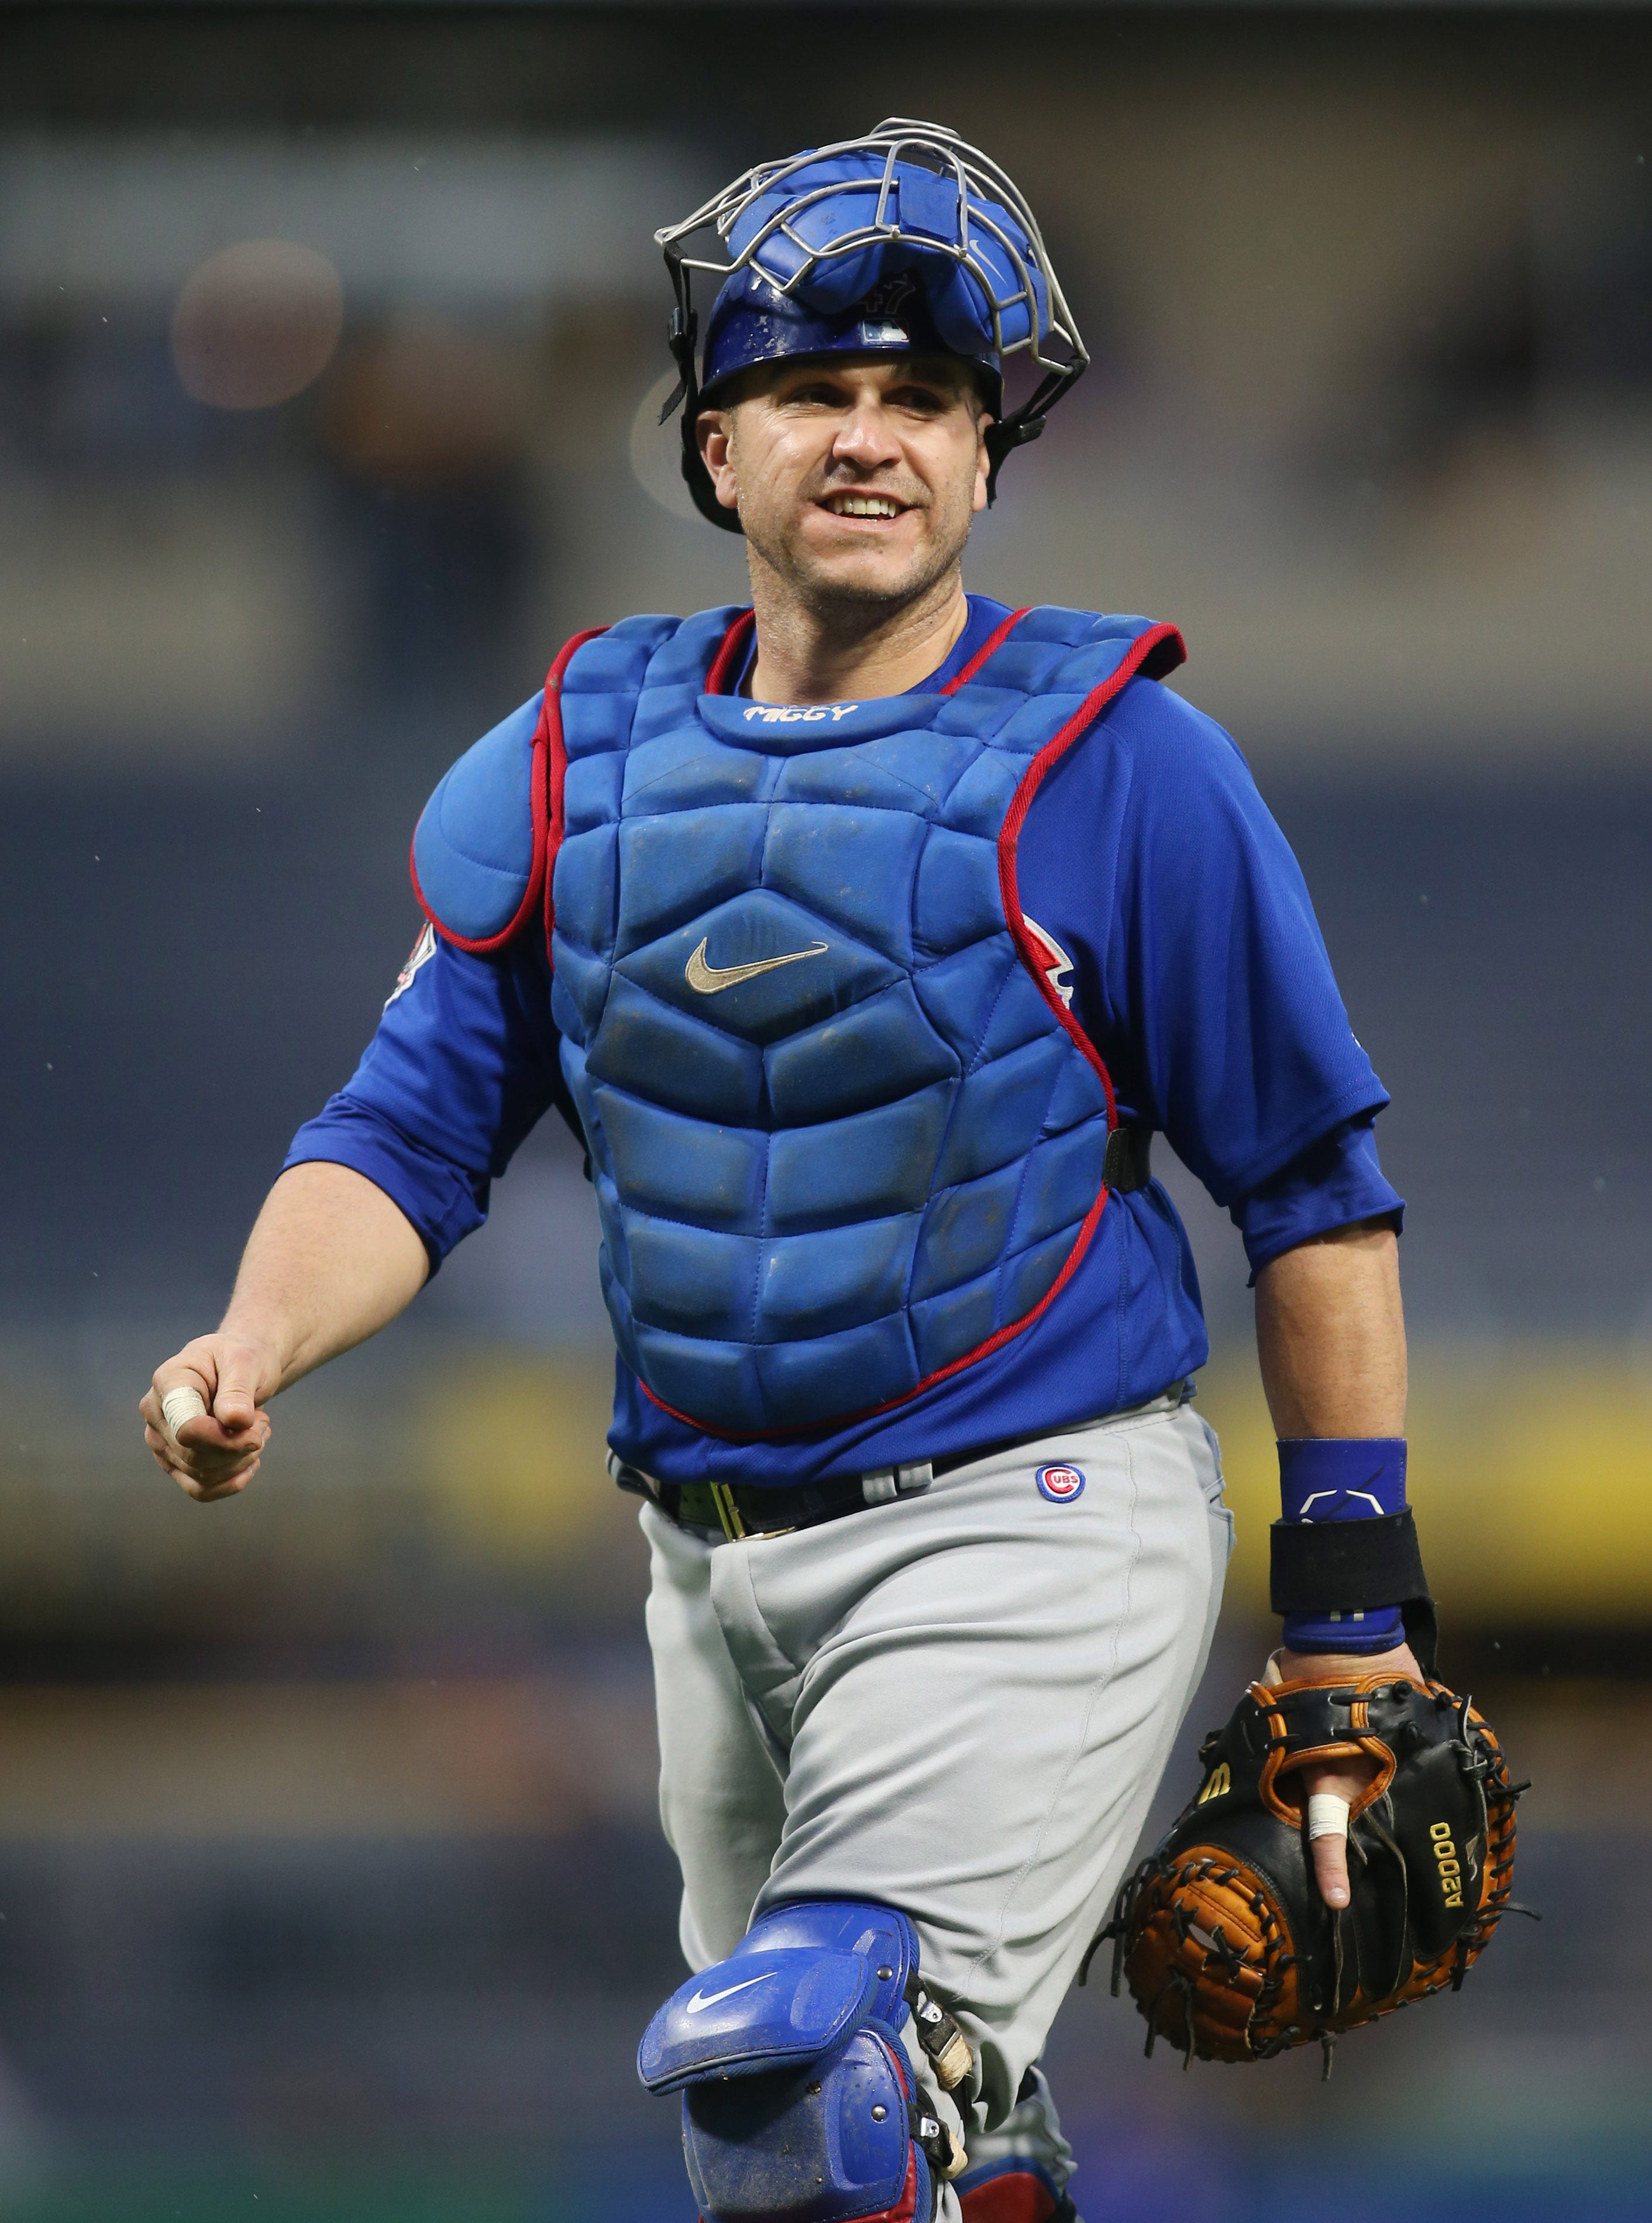 Cubs cut Miguel Montero hours after he 